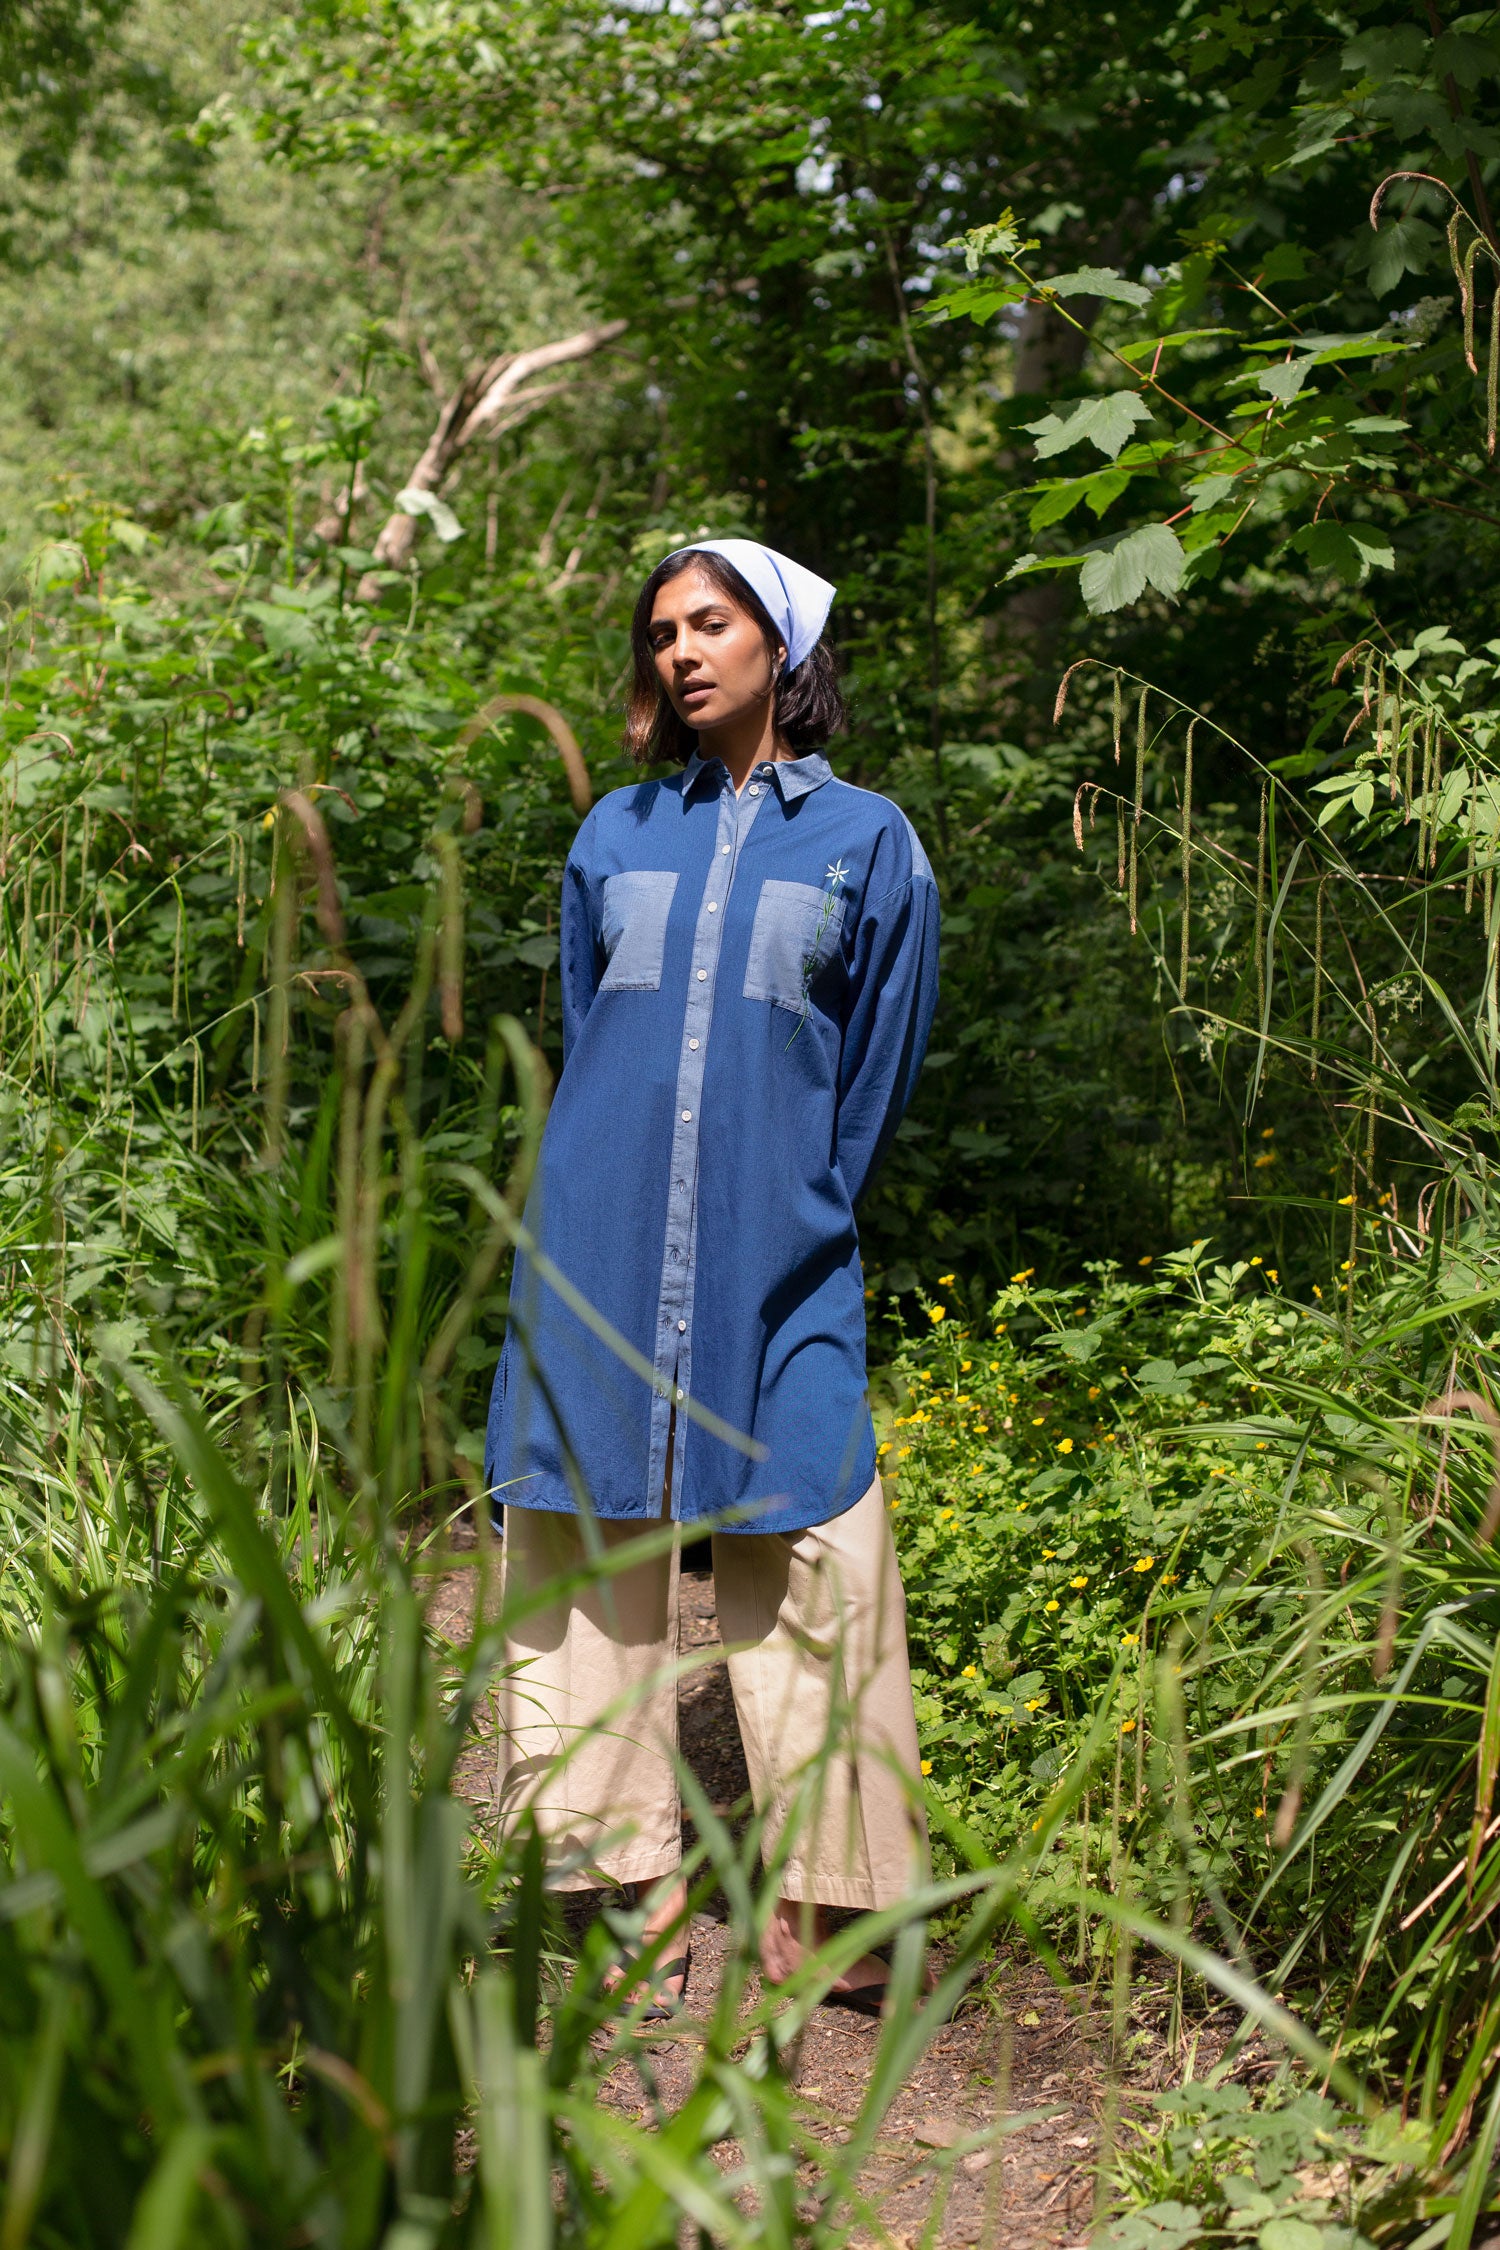 Model stands, surrounded by wild plants and greenery, with her hands behind her back. She wears Saywood's Etta Oversized Shirtdress in Japanese denim, worn over beige trousers, with a pale blue bandana in her hair made from recycled cotton.